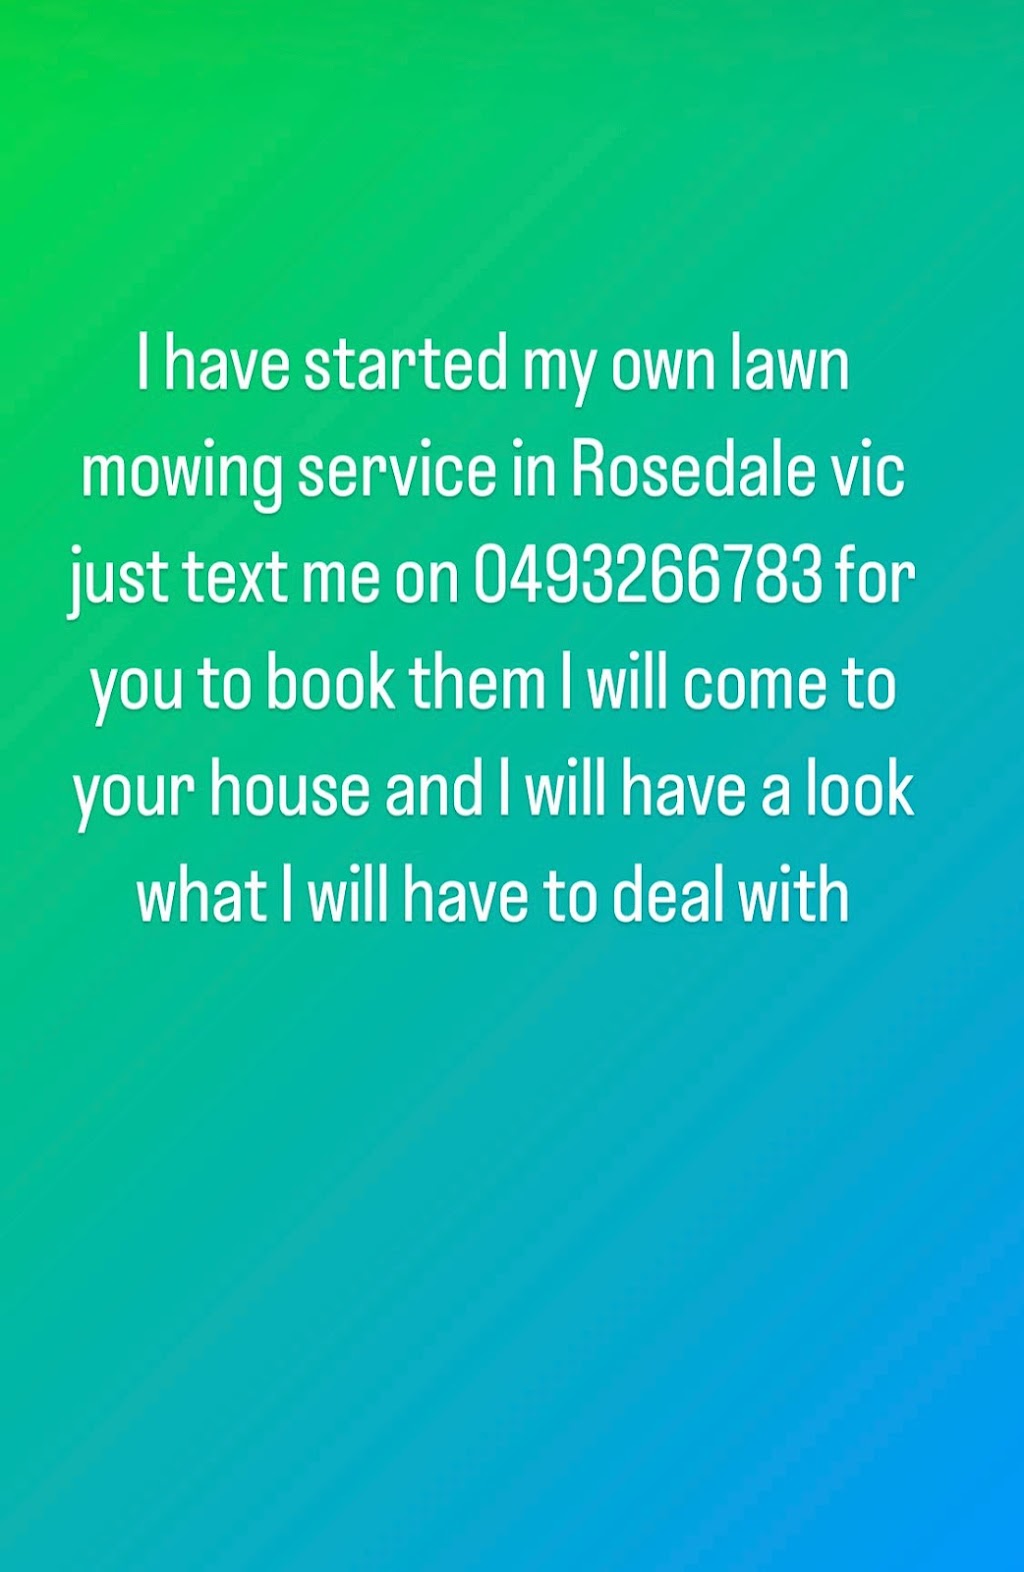 Coopers lawn mowing service | store | 37 MacKay St, Rosedale VIC 3847, Australia | 0493266783 OR +61 493 266 783